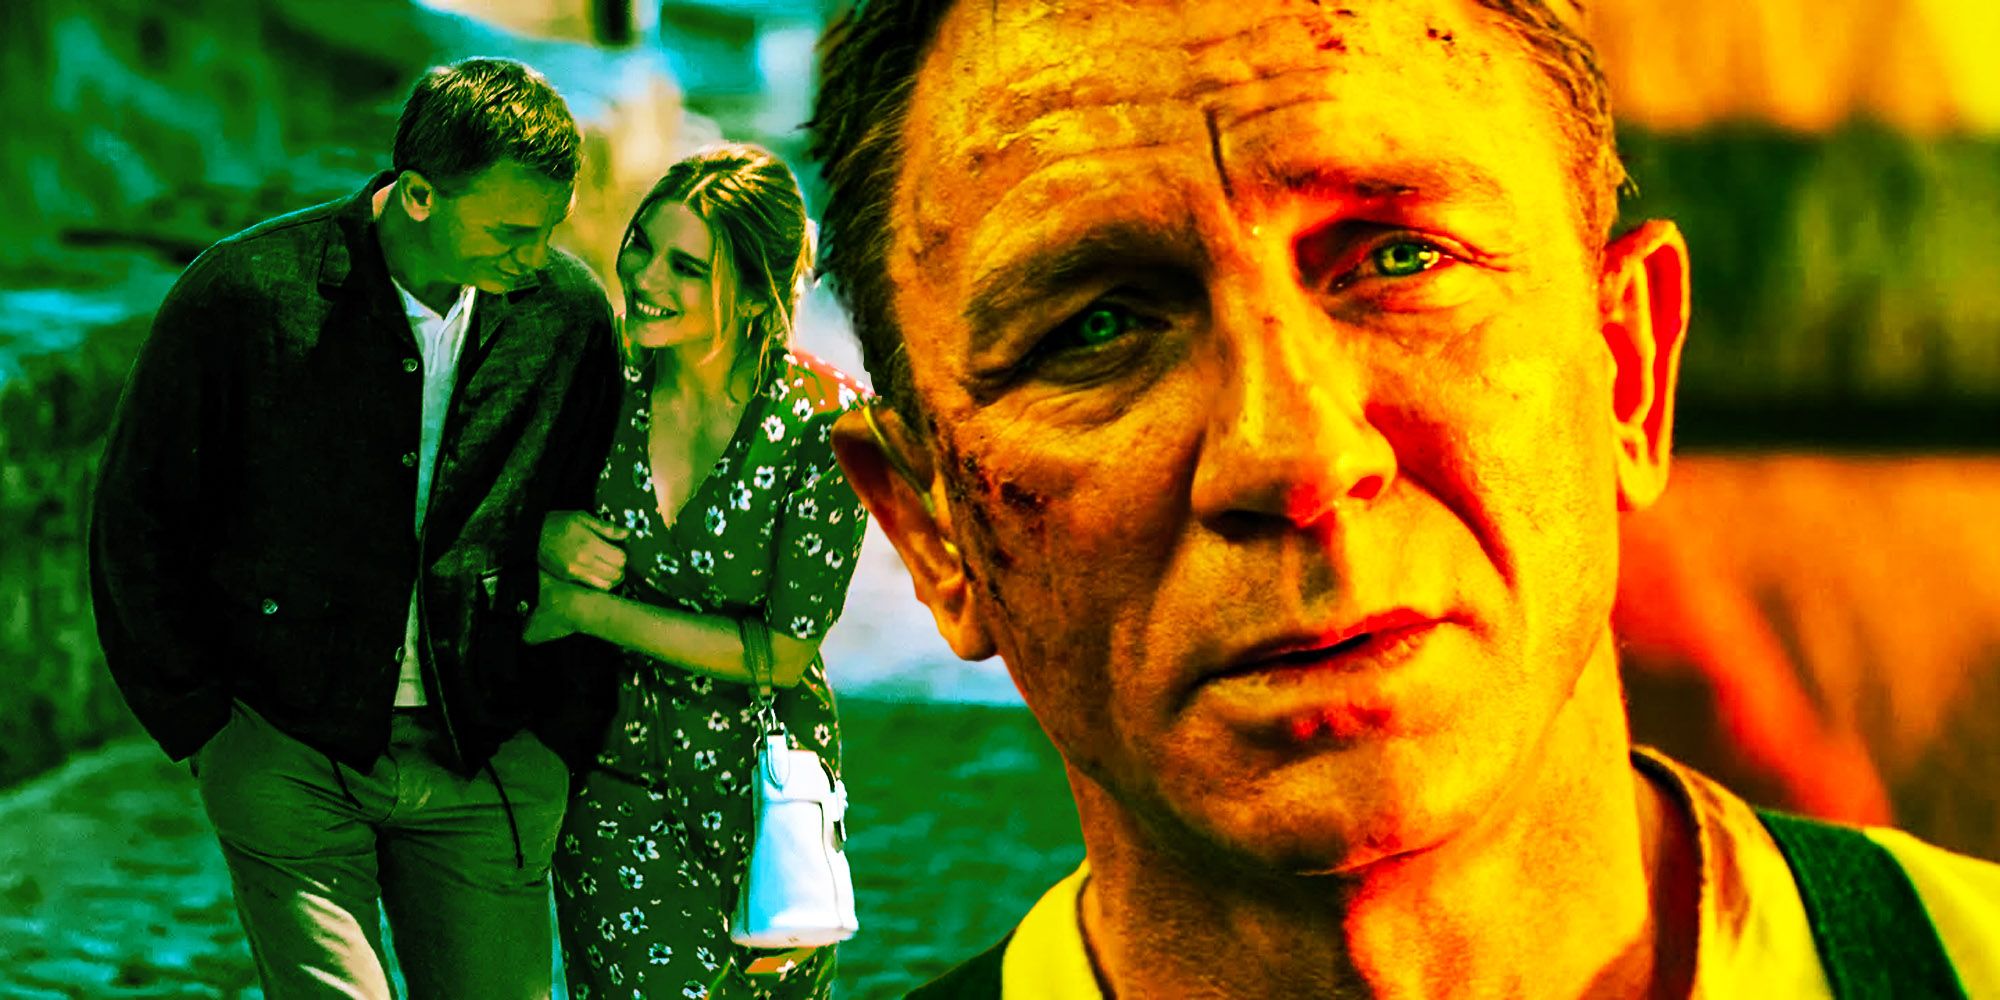 Daniel Craig Is Right About James Bond's No Time To Die Ending